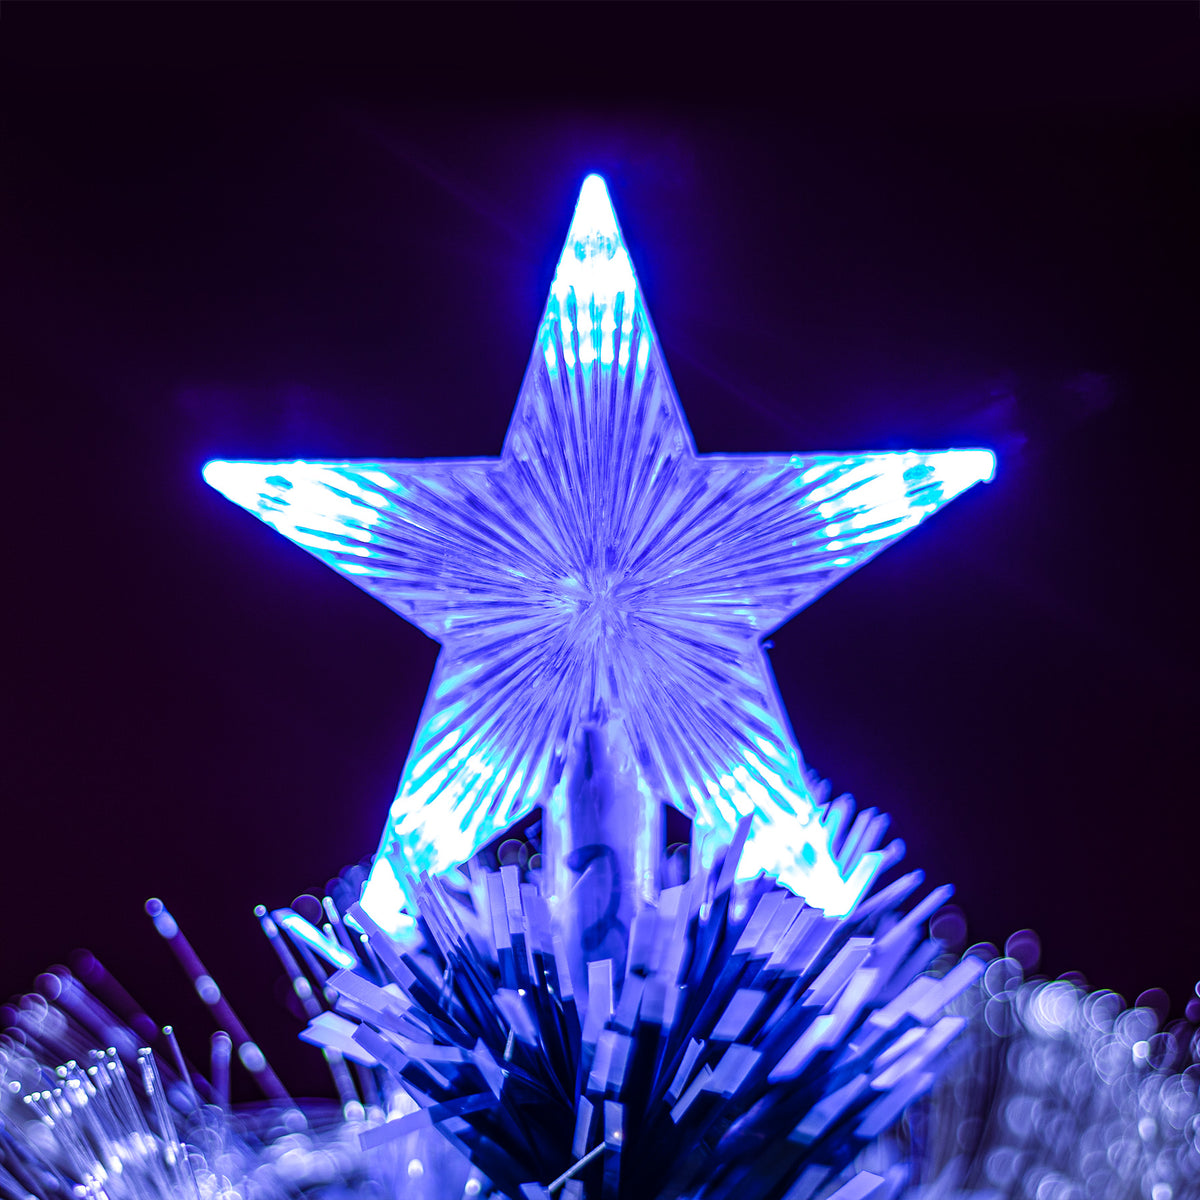 Green Christmas Tree 2ft to 6ft with White Fibre Optic and Blue LED Lights and Stars